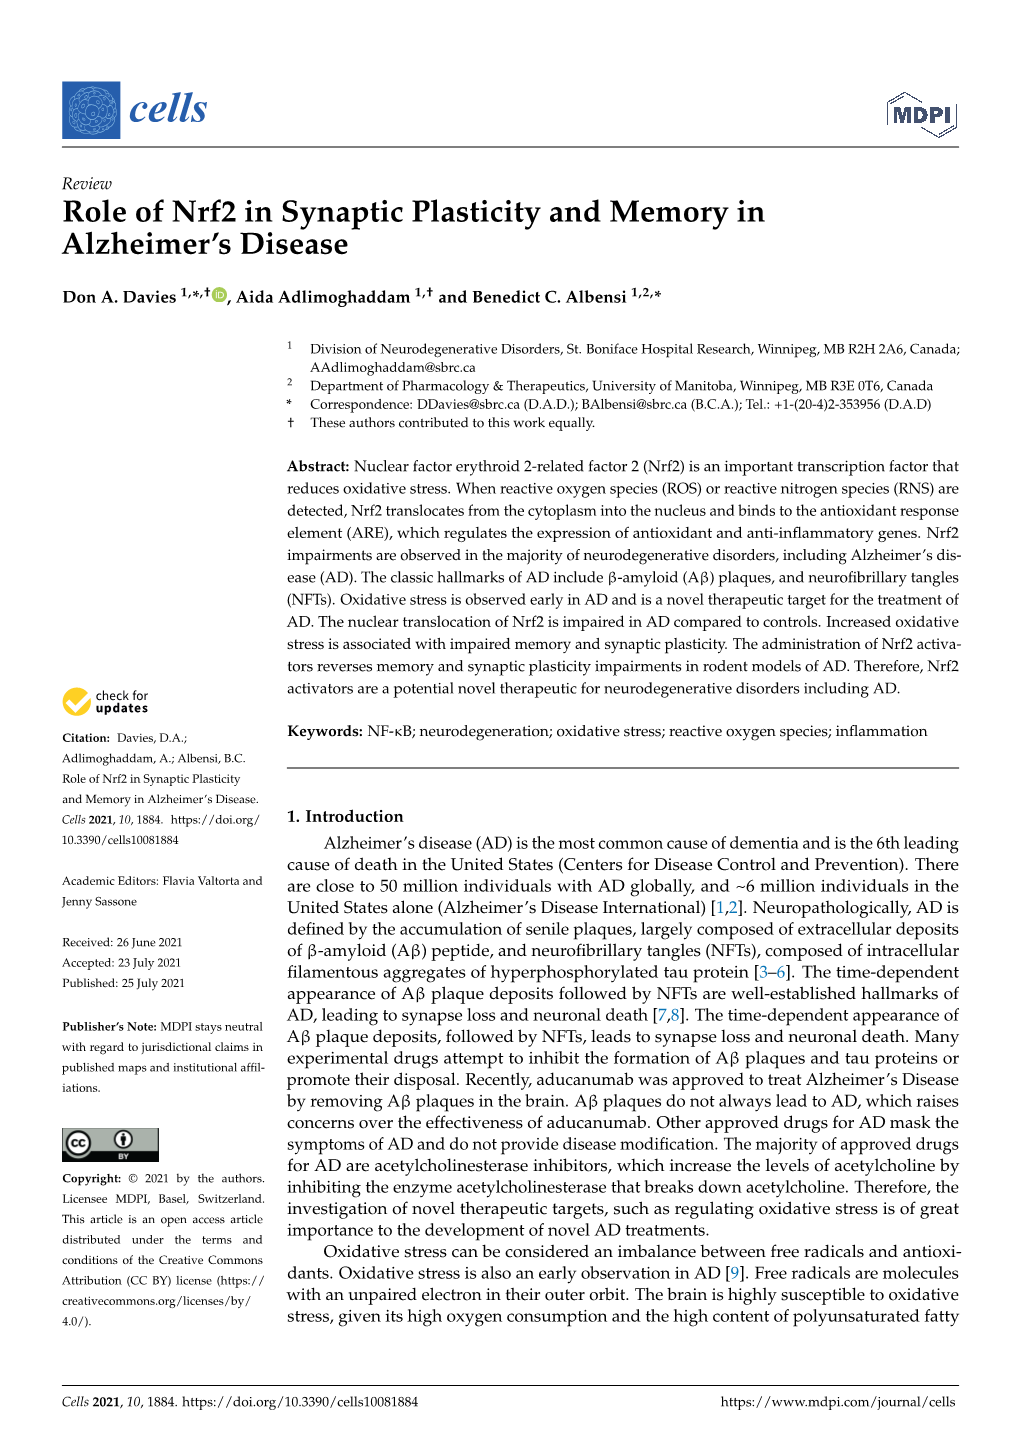 Role of Nrf2 in Synaptic Plasticity and Memory in Alzheimer's Disease